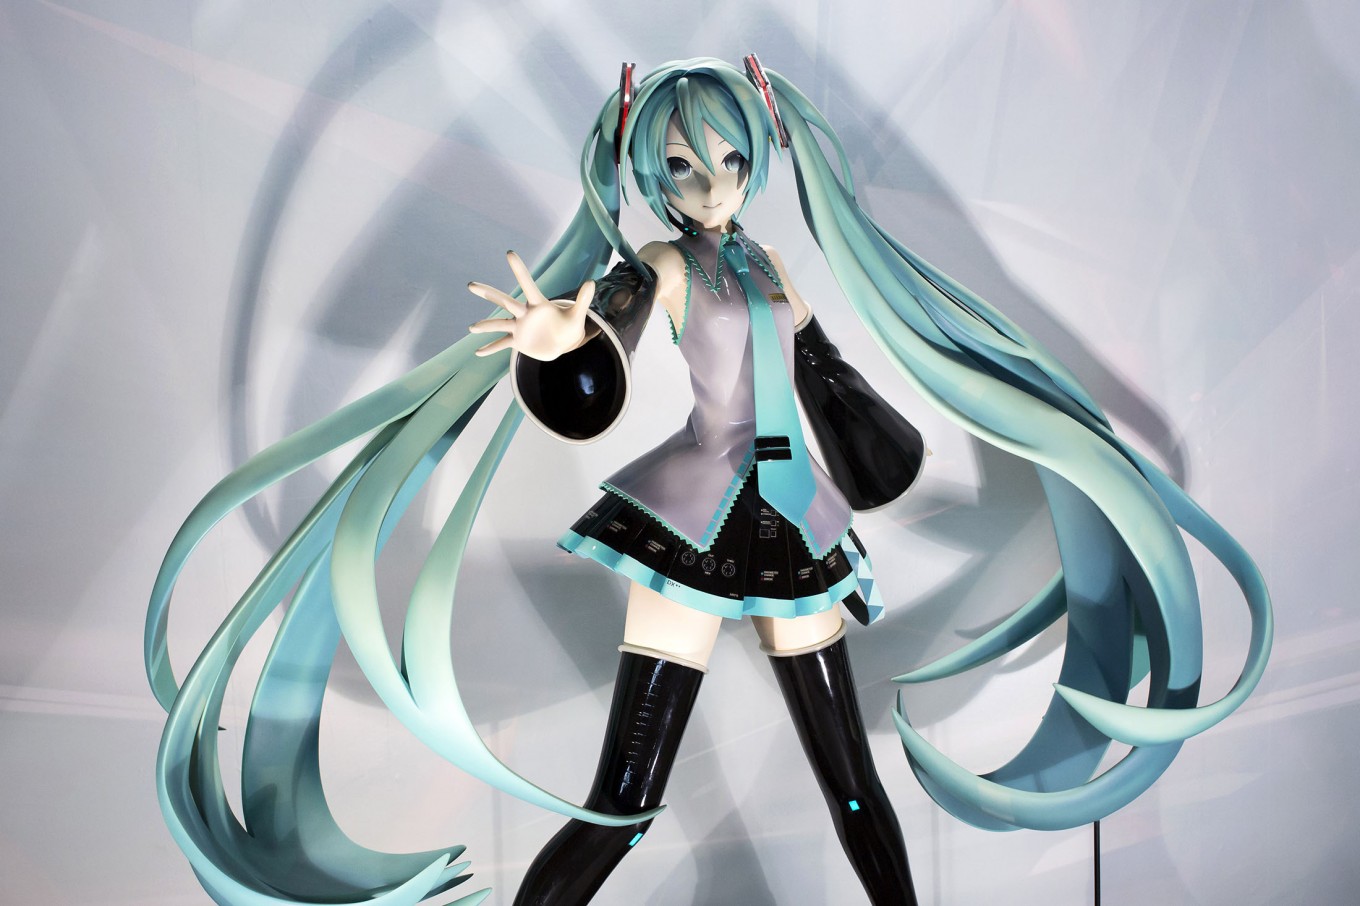 Hatsune Miku affirms global star status with second Europe tour